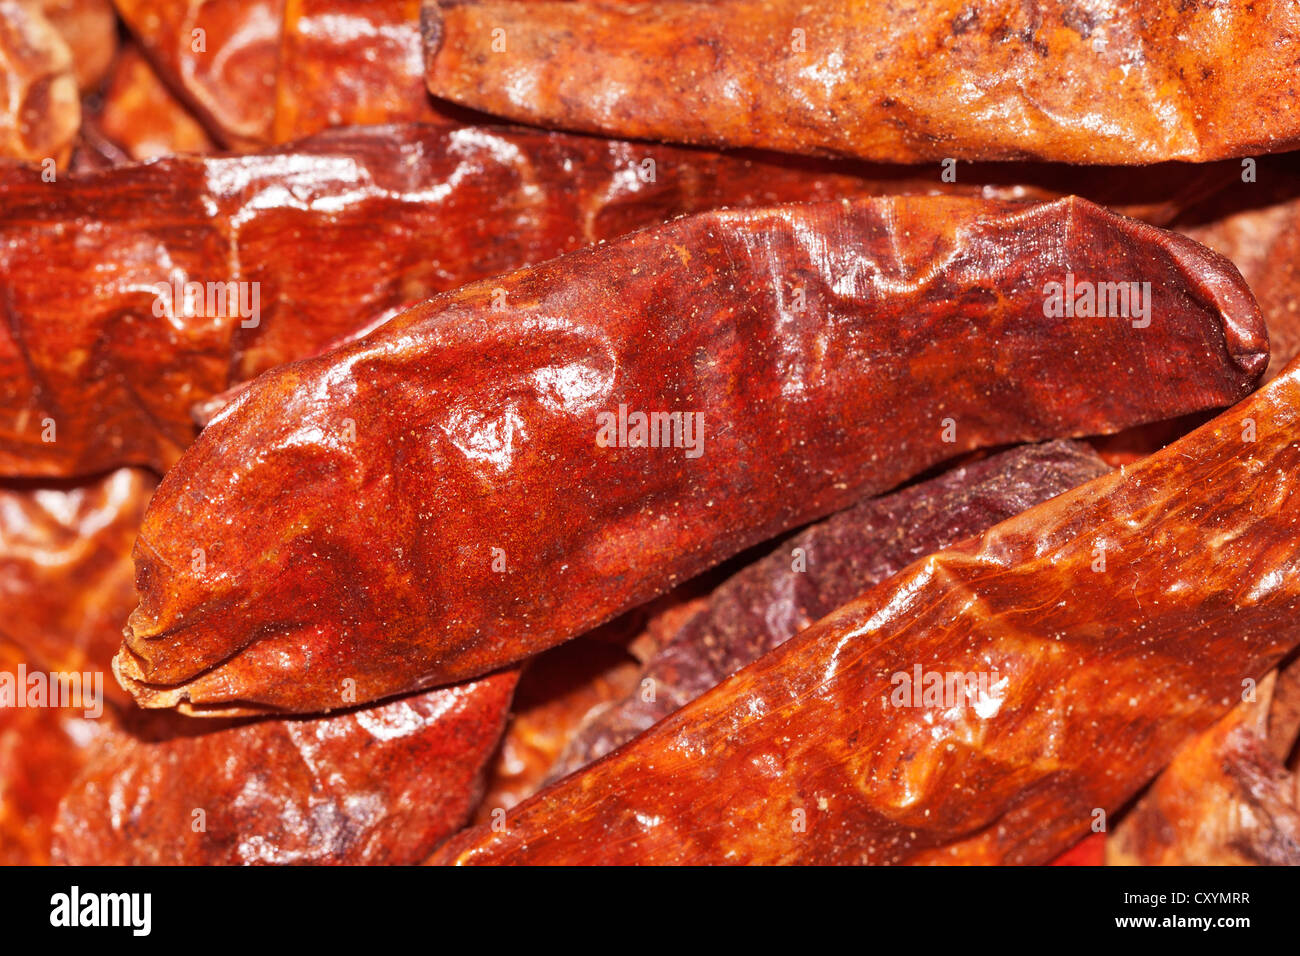 Large chili peppers (Capsicum), hot dried chilis, from Indonesia Stock Photo